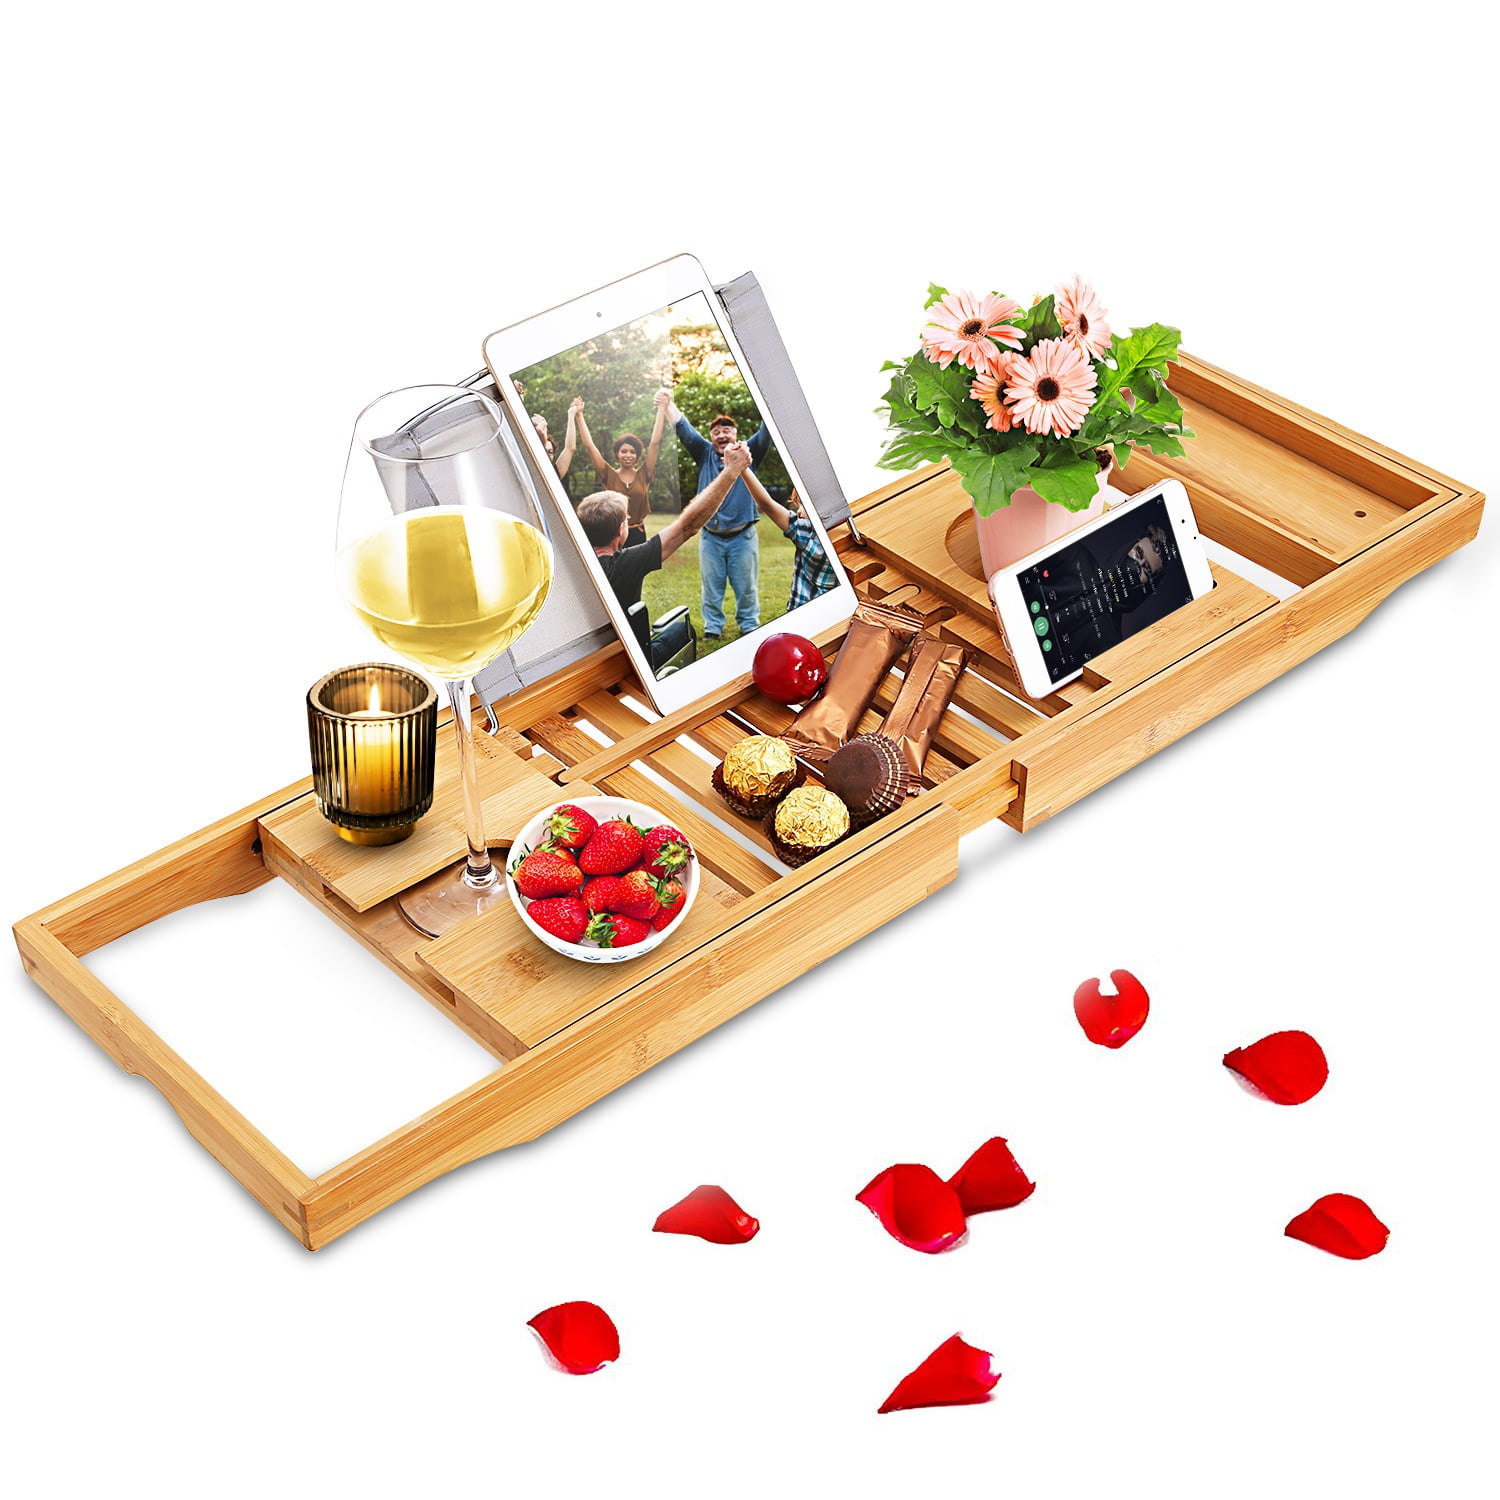 Bathtub Caddy, iMounTEK Bamboo Bath Tray, Extendable Tub Organizer Holder  for Tablet, Book, Phone, Wine Glass, Candles, and Soap